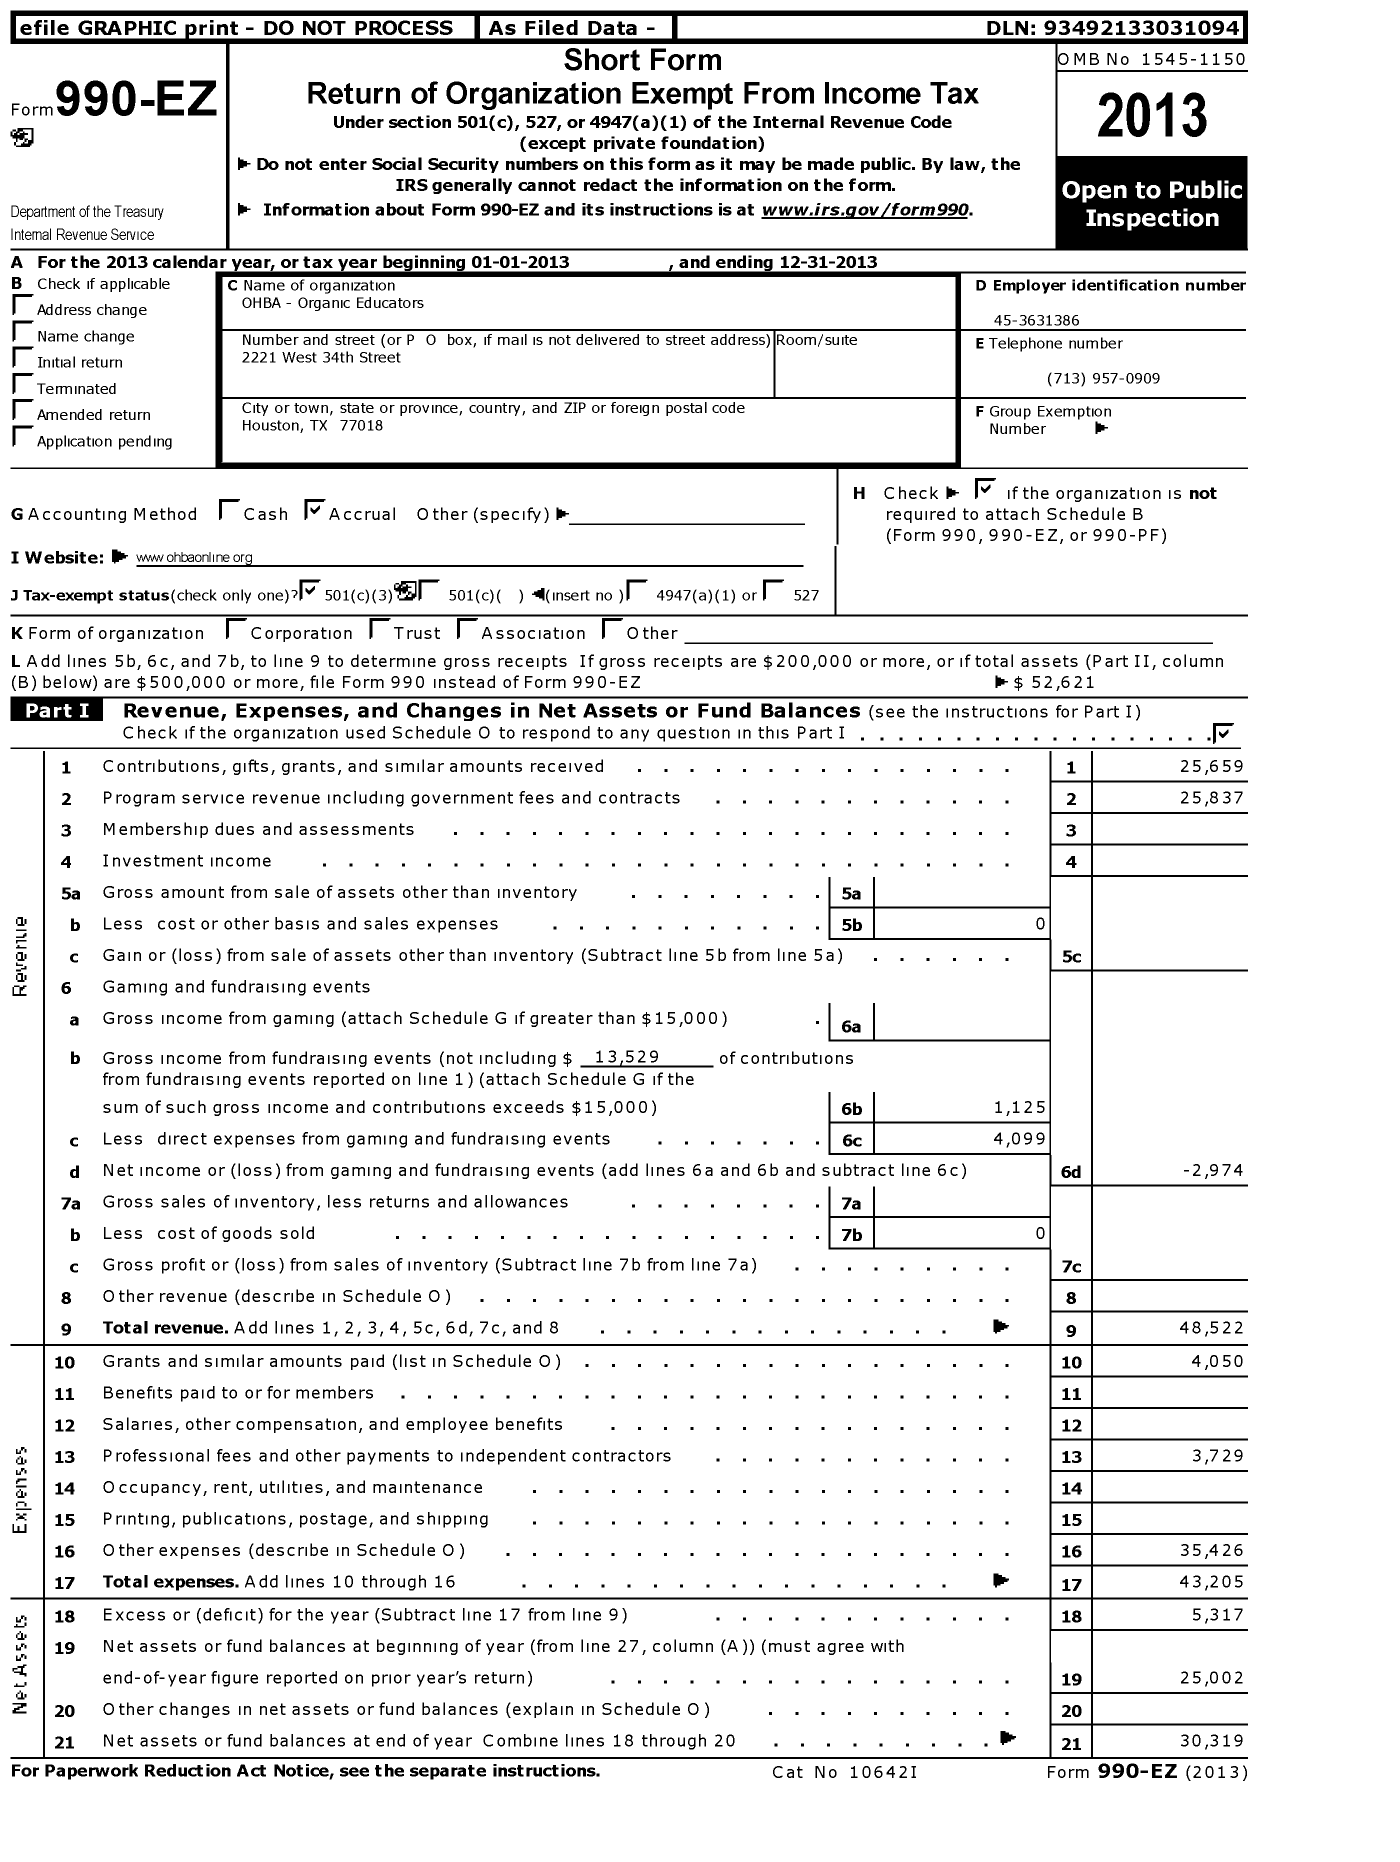 Image of first page of 2013 Form 990EZ for OHBA - Organic Educators